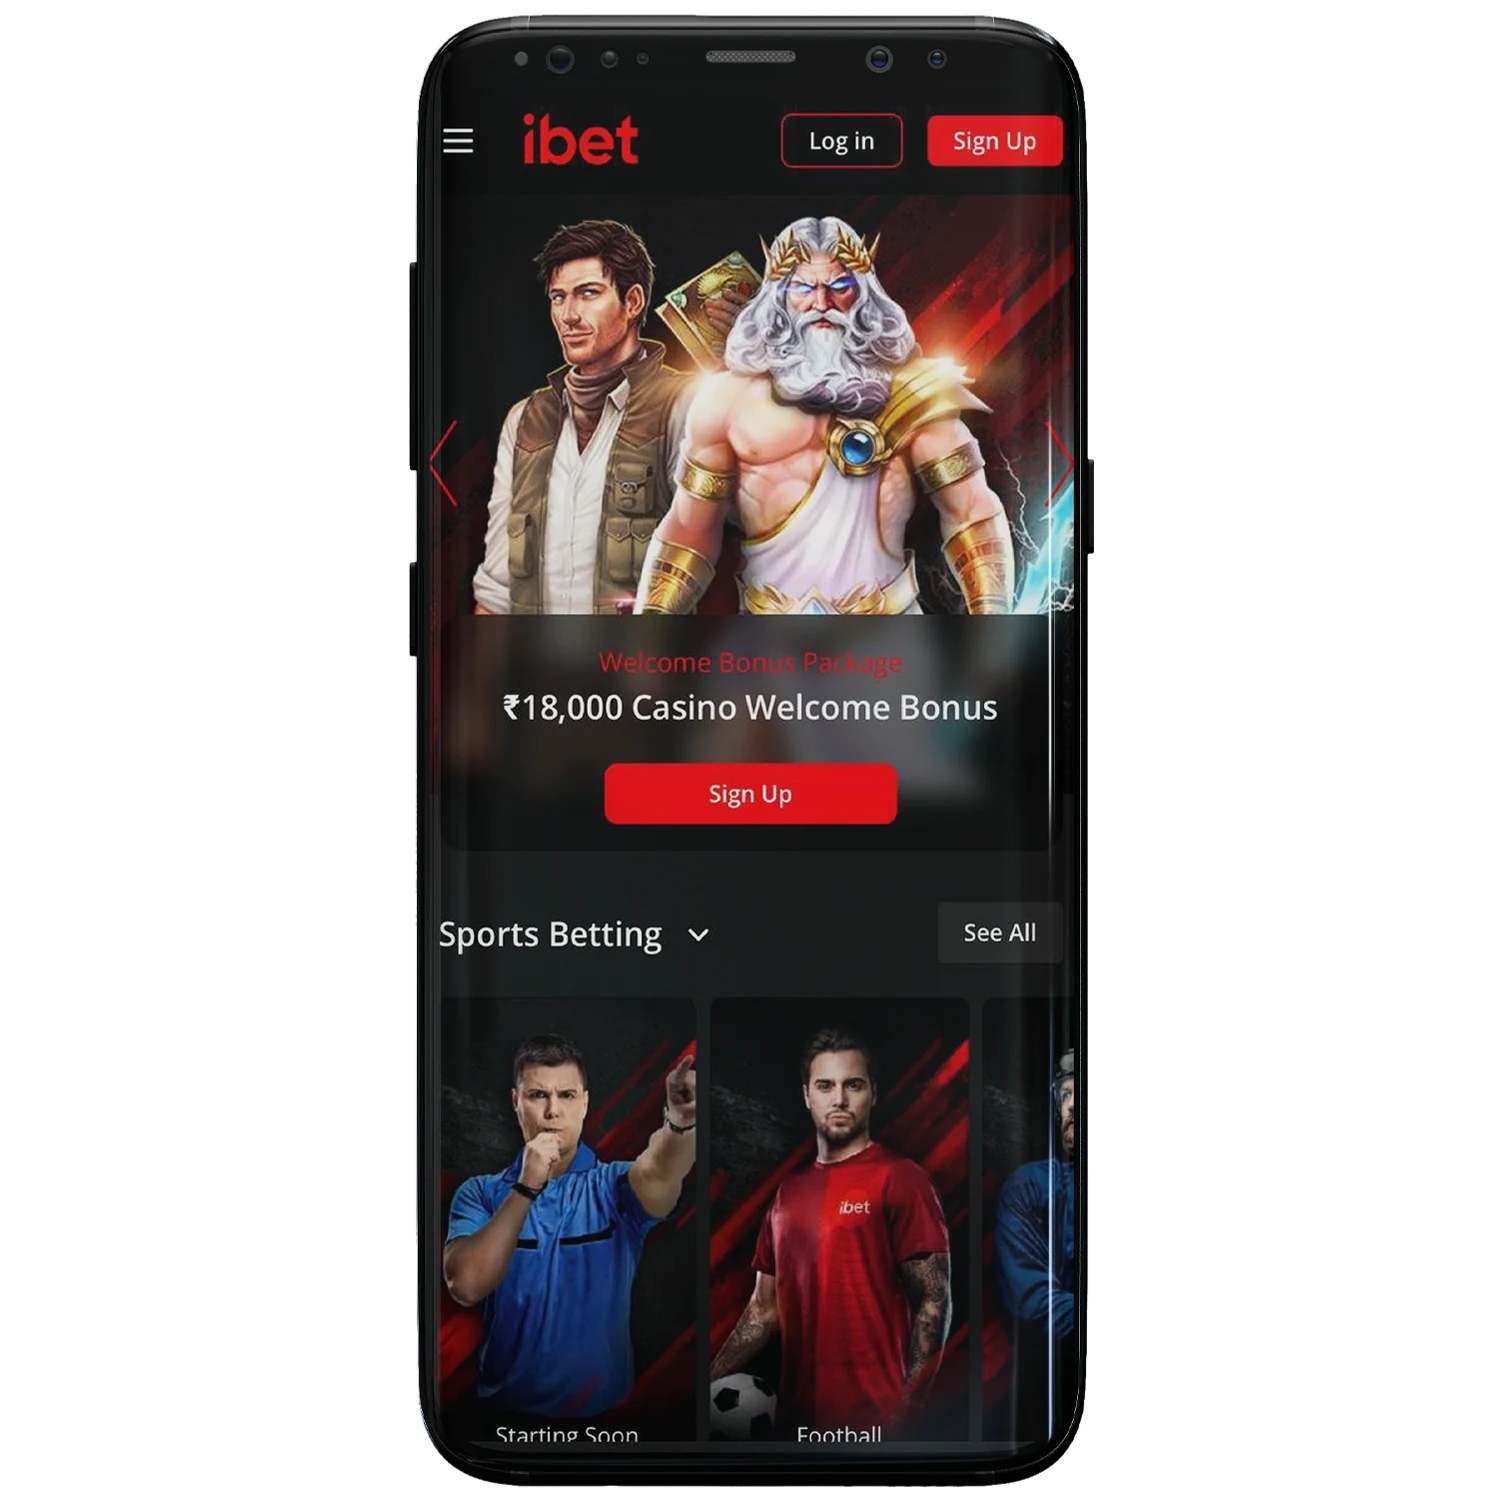 Bet on sports and play online casino at iBet on your mobile device.